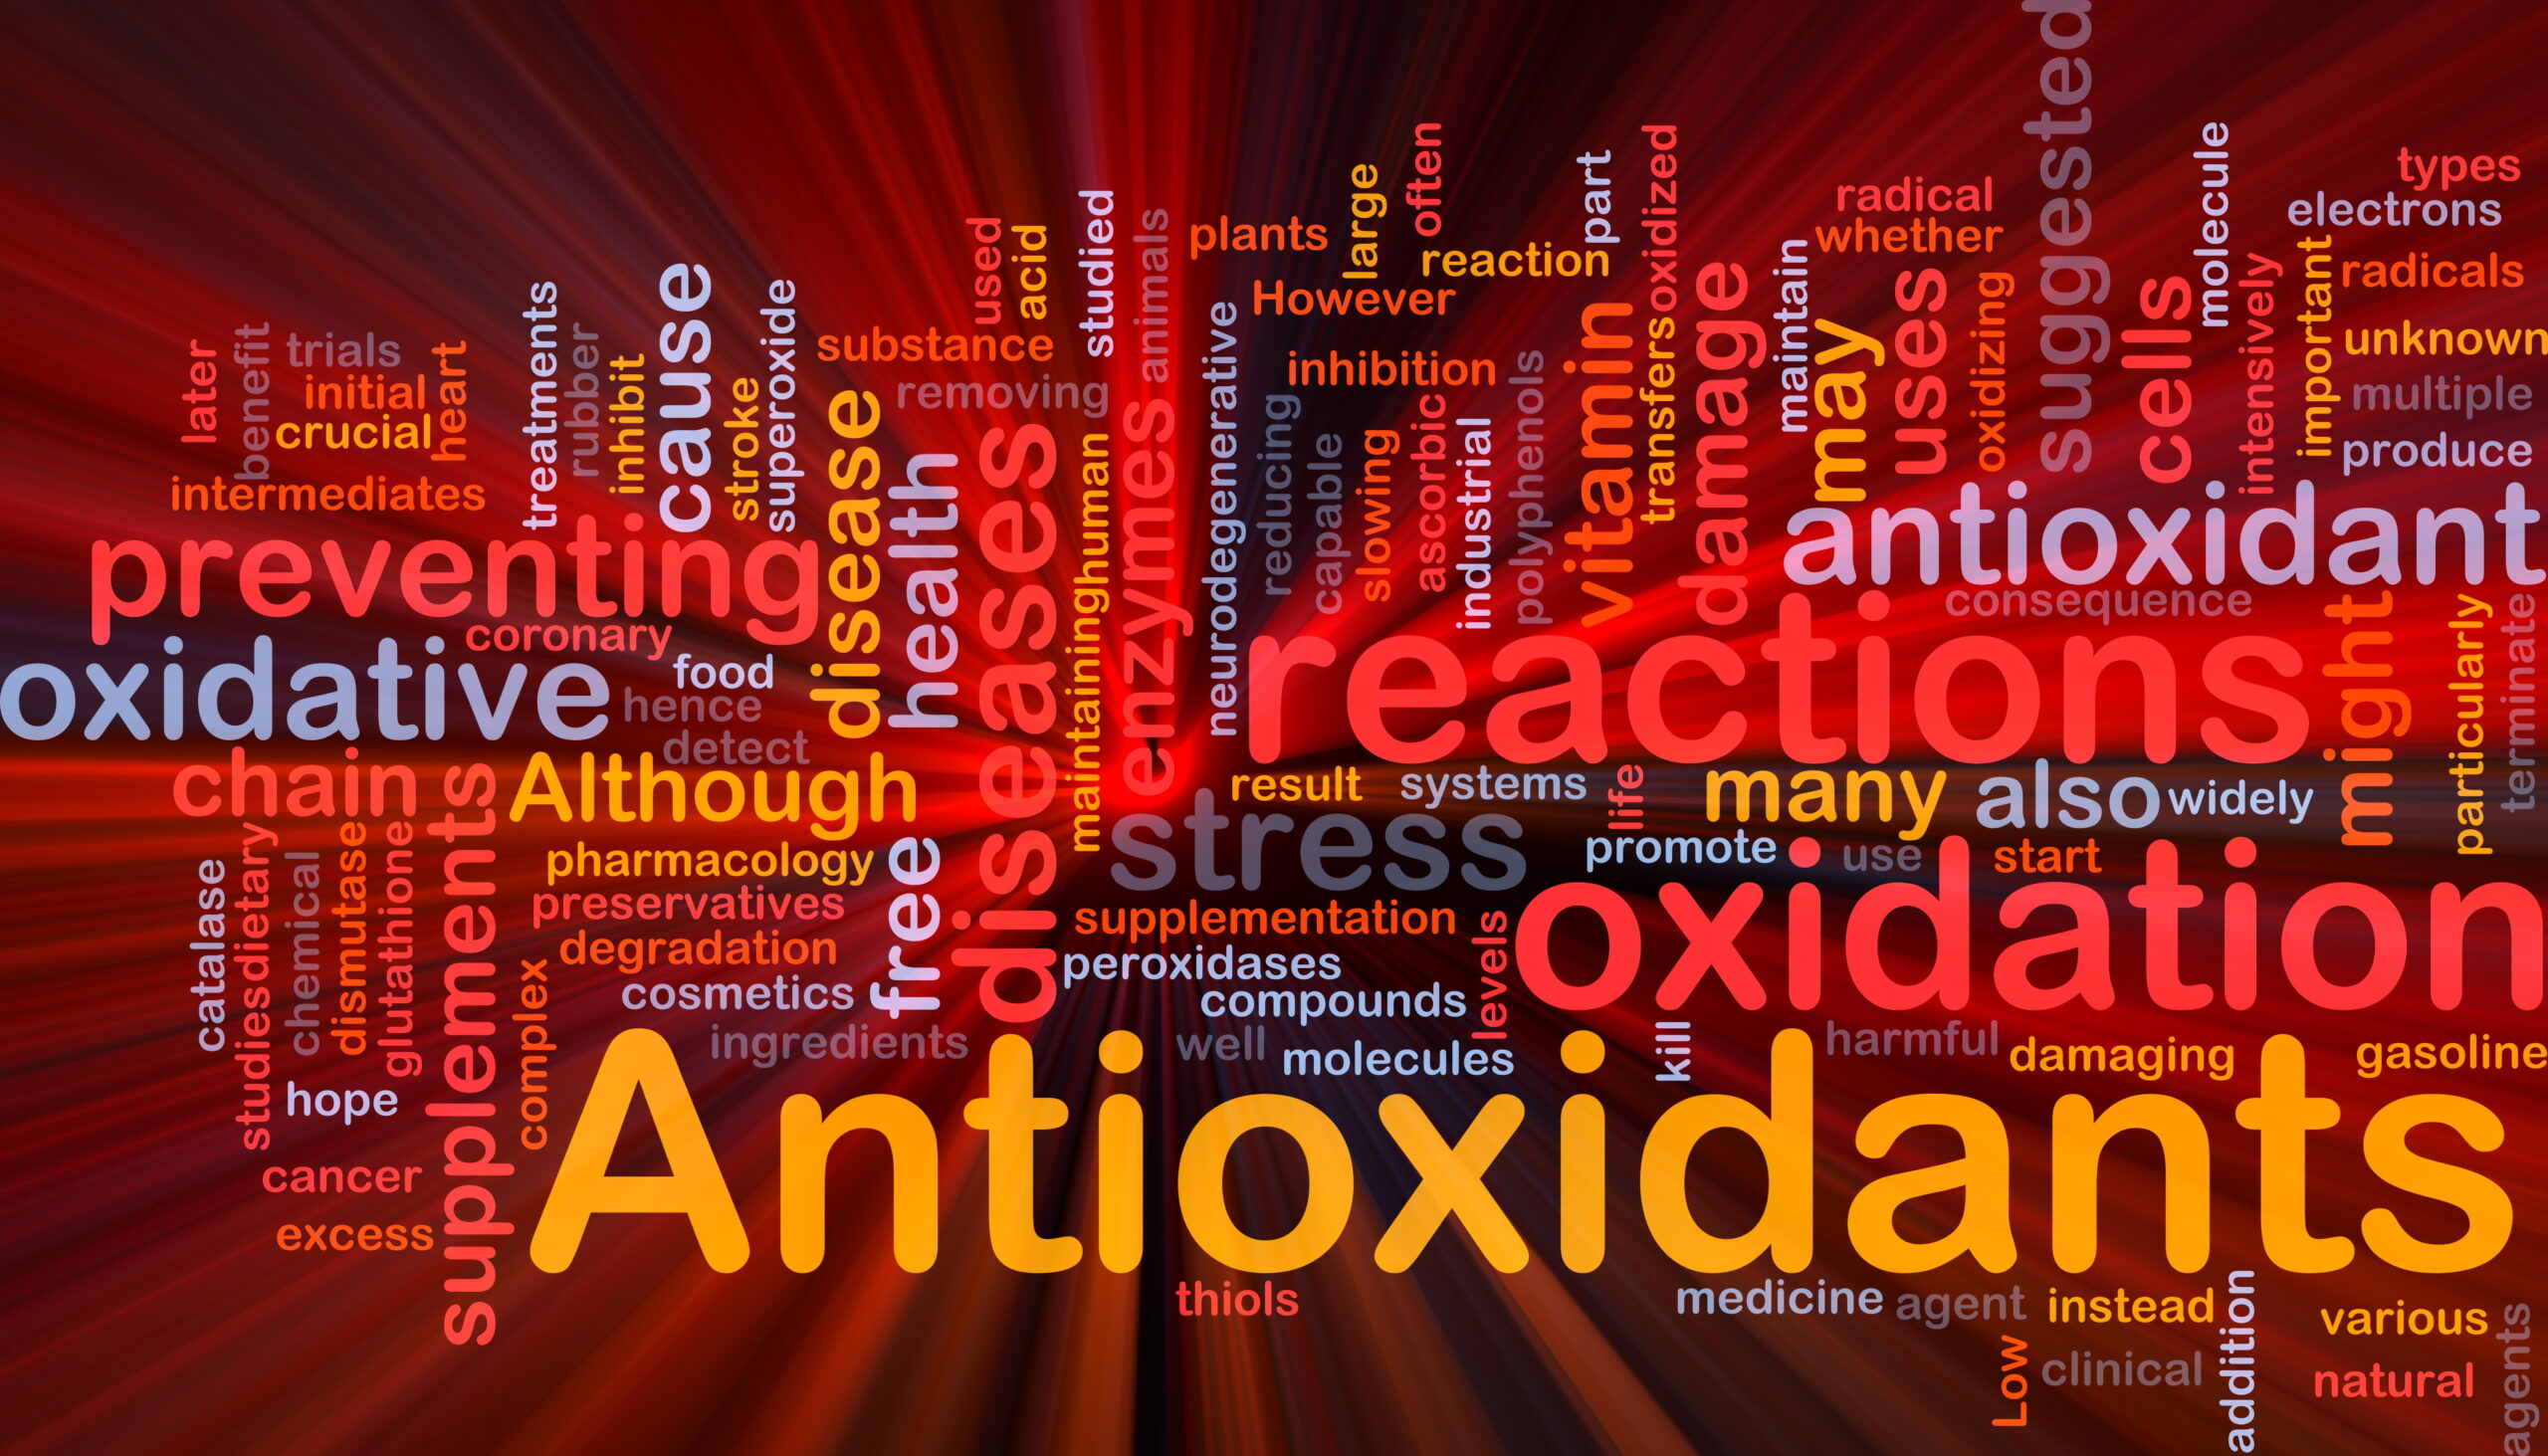 Motivation is affected by oxidative stress, nutrition can help